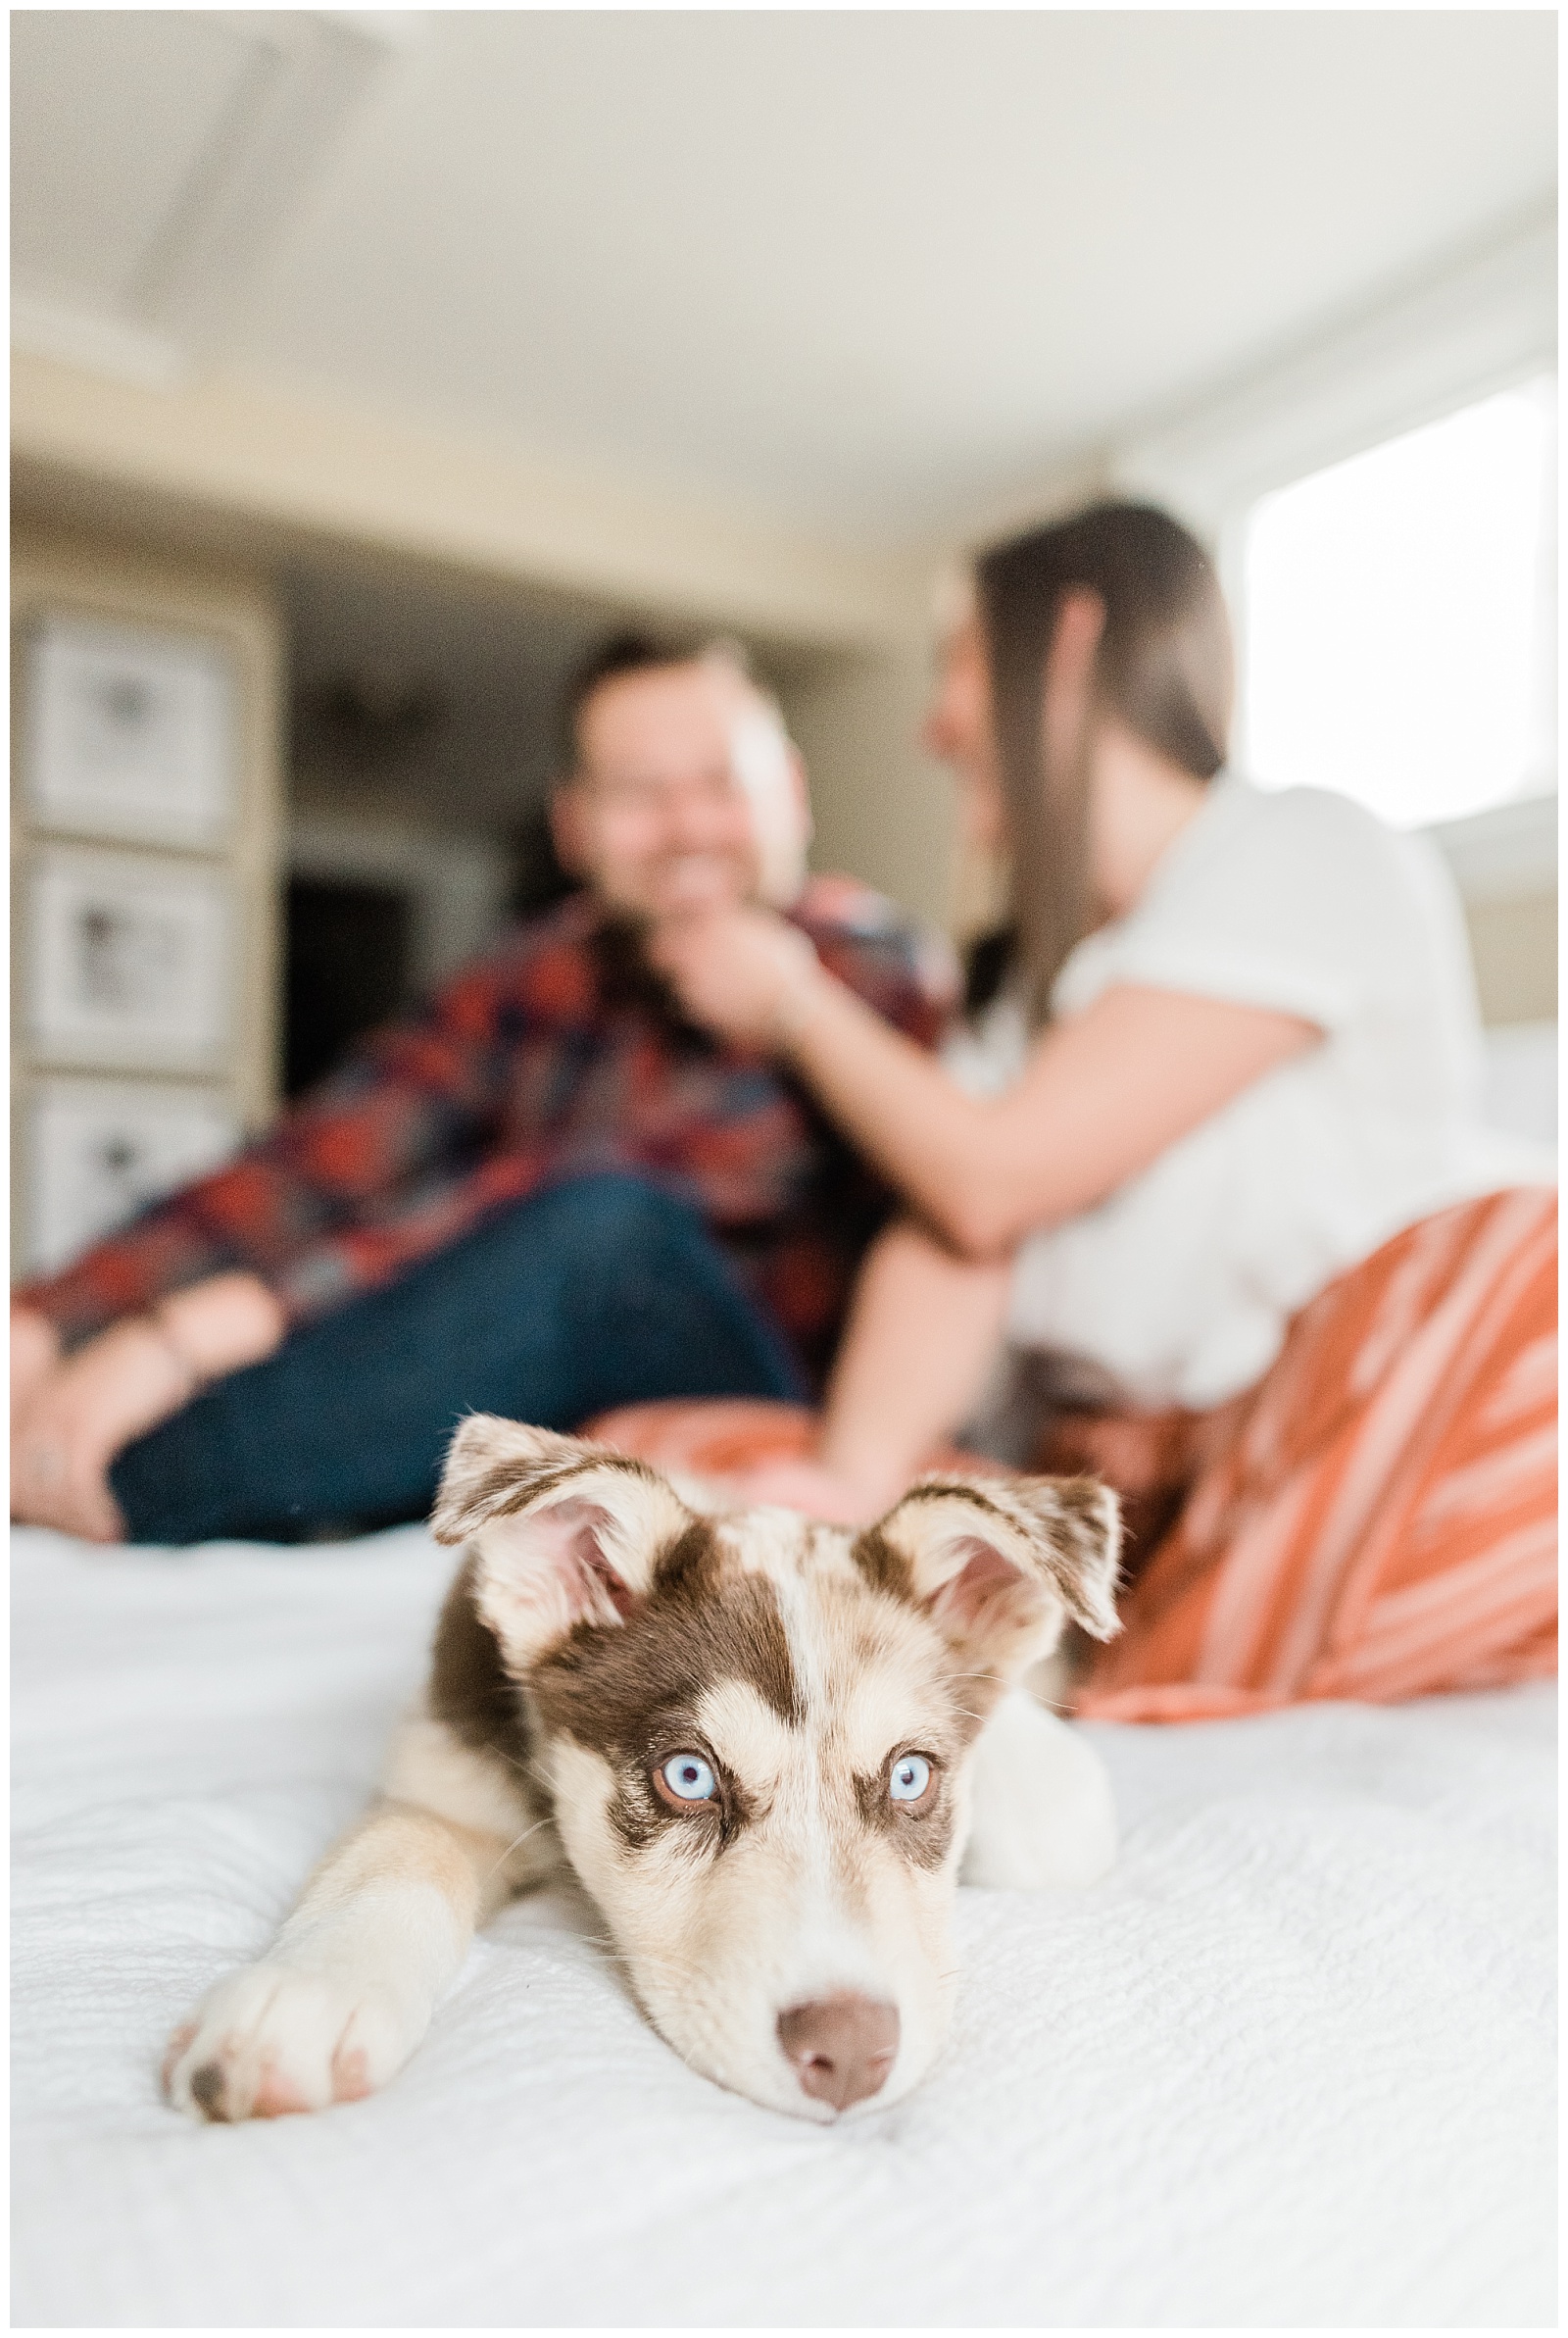 In home photo session, new puppy, casual, weekend, new jersey lifestyle, natural light photographer, fur baby, bed, sunday